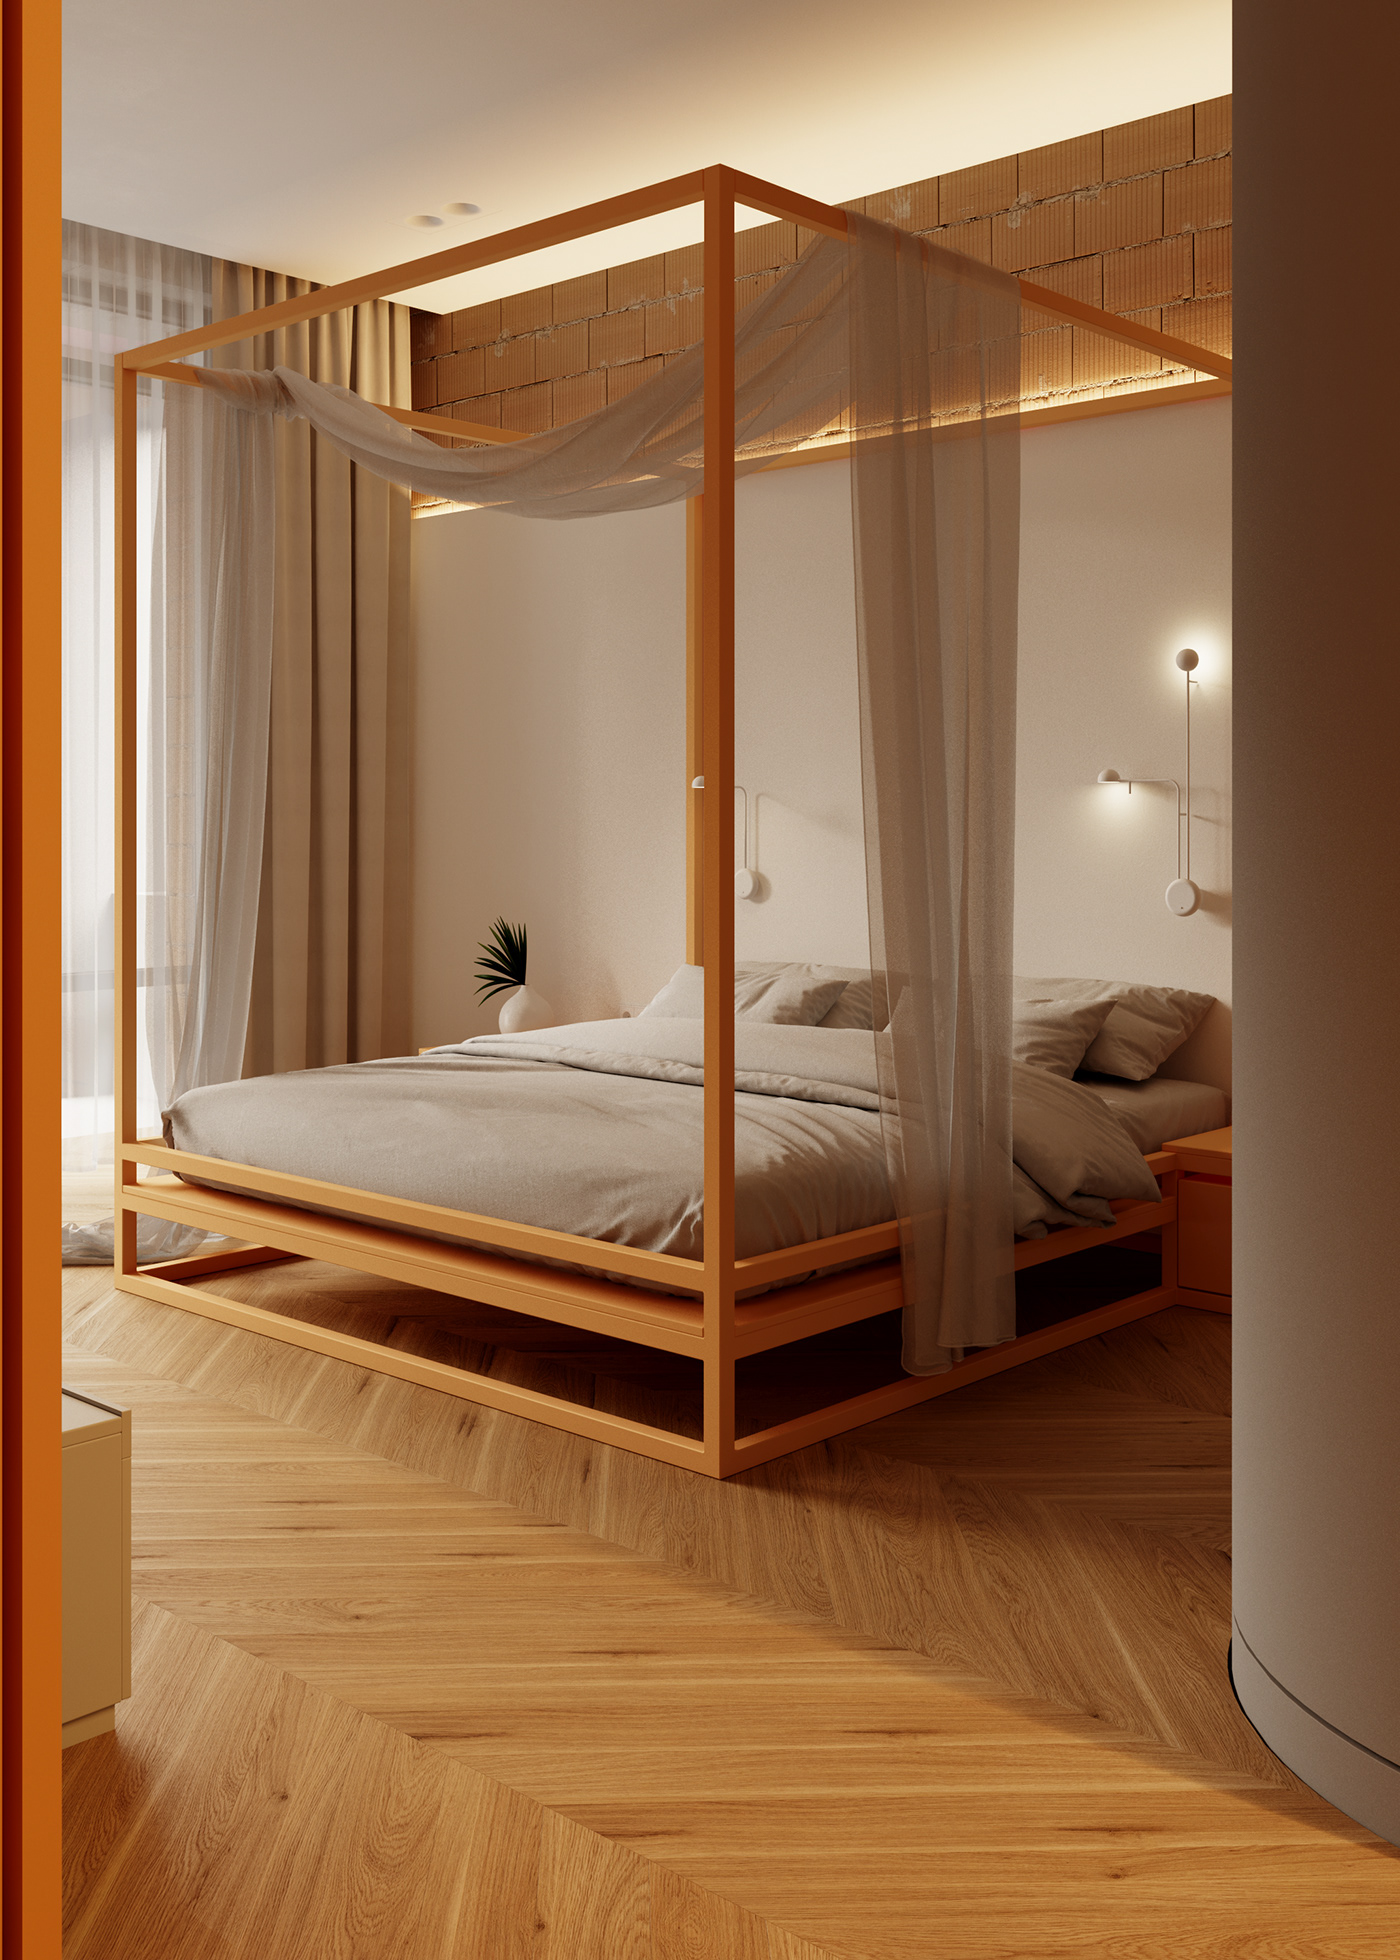 Natural light overflows the room, and the reflection effect from a white wall, combined with the wood grain floor and bed frame, sets up a warm atmosphere.